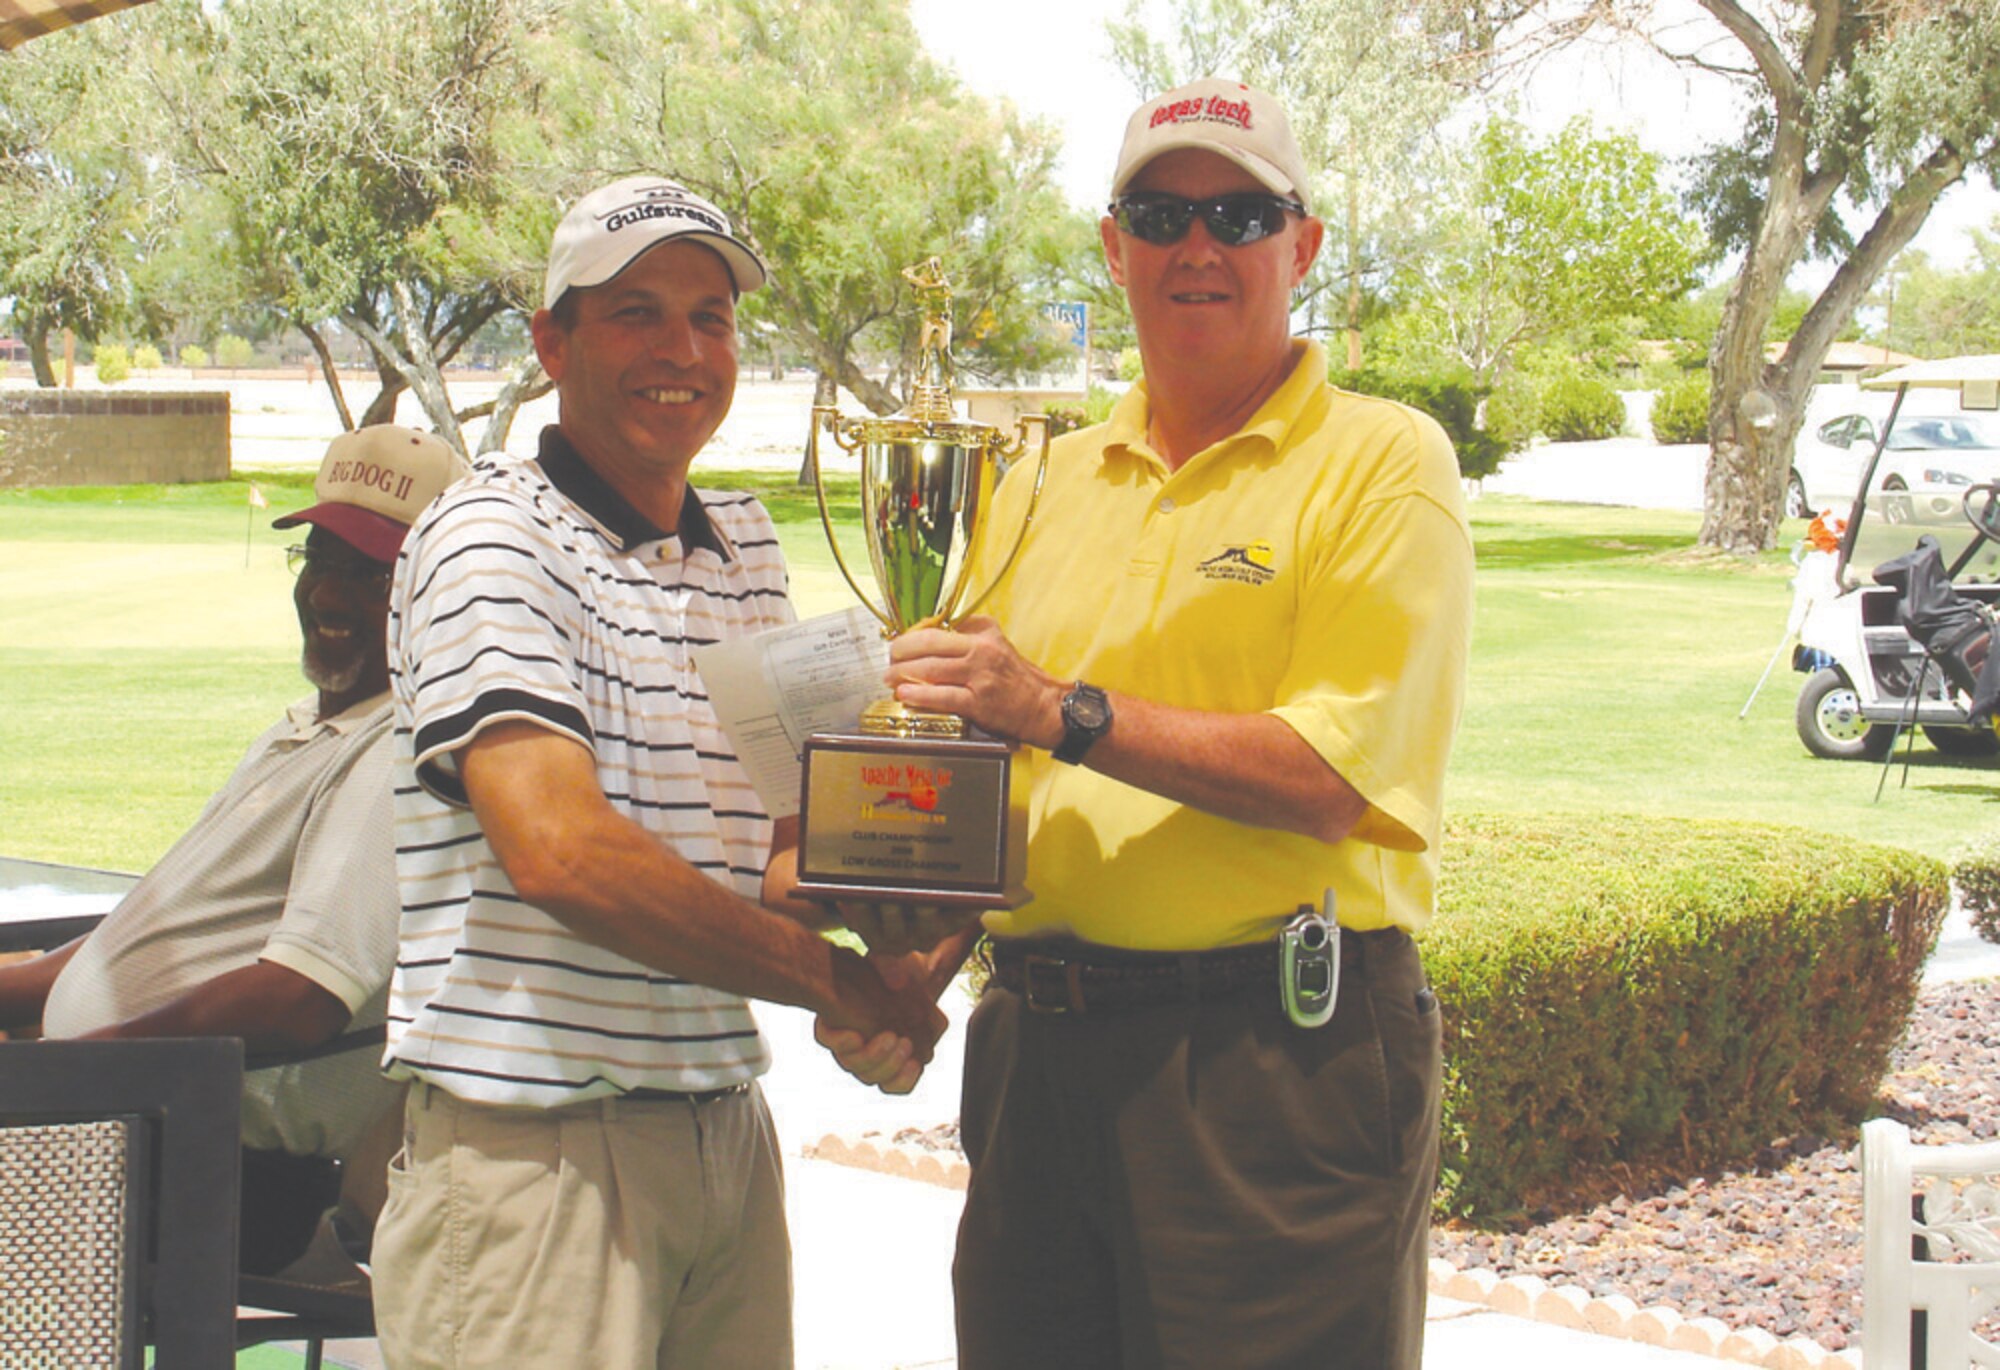 Ralph Aegan accepts his trophy from Col. Gary Bryson, 49th Maintenance Group Commander.